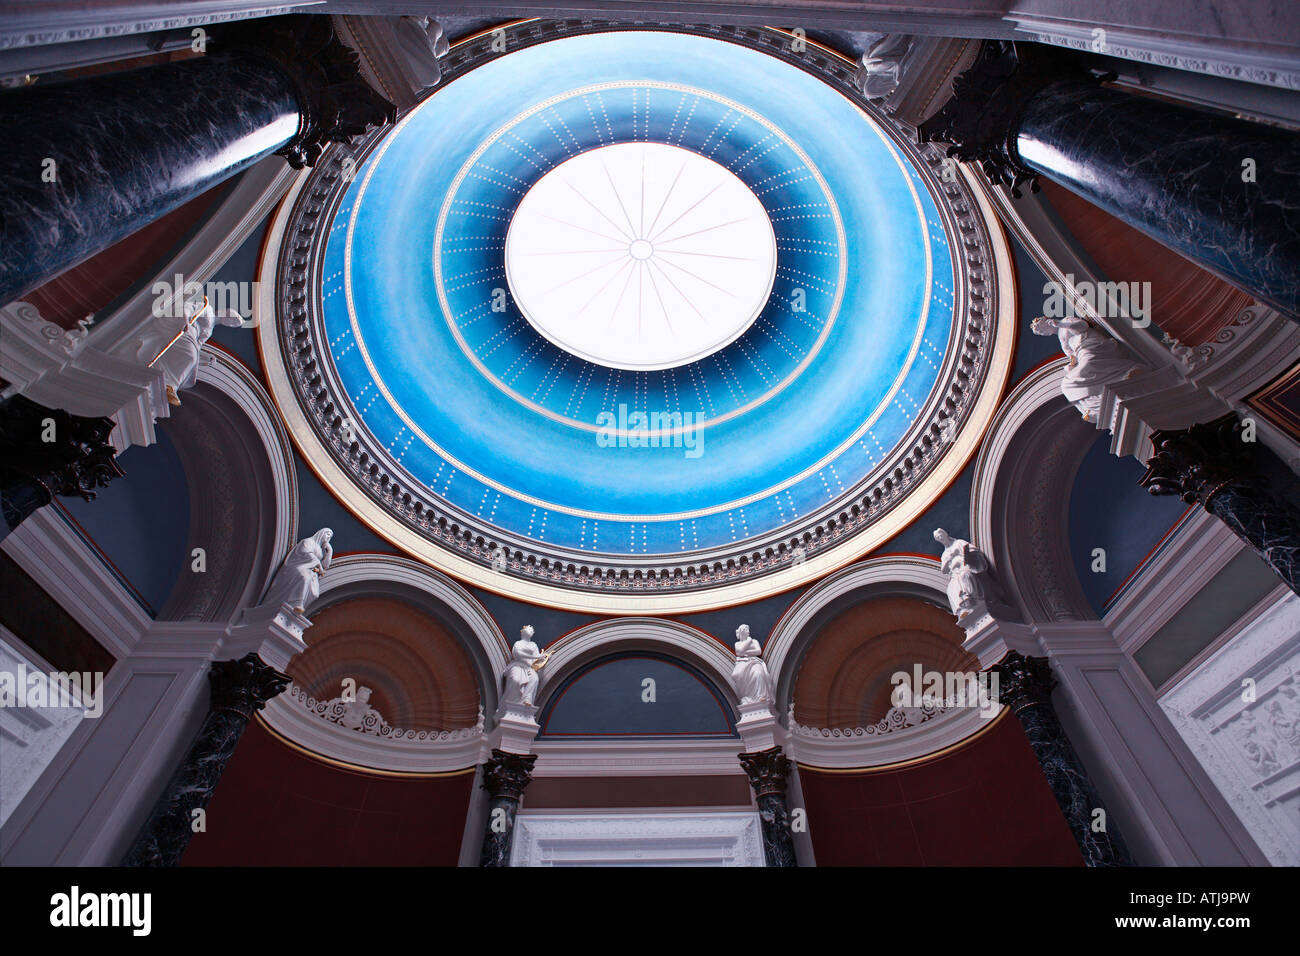 The dome of the Alte National Gallery in Berlin Stock Photo